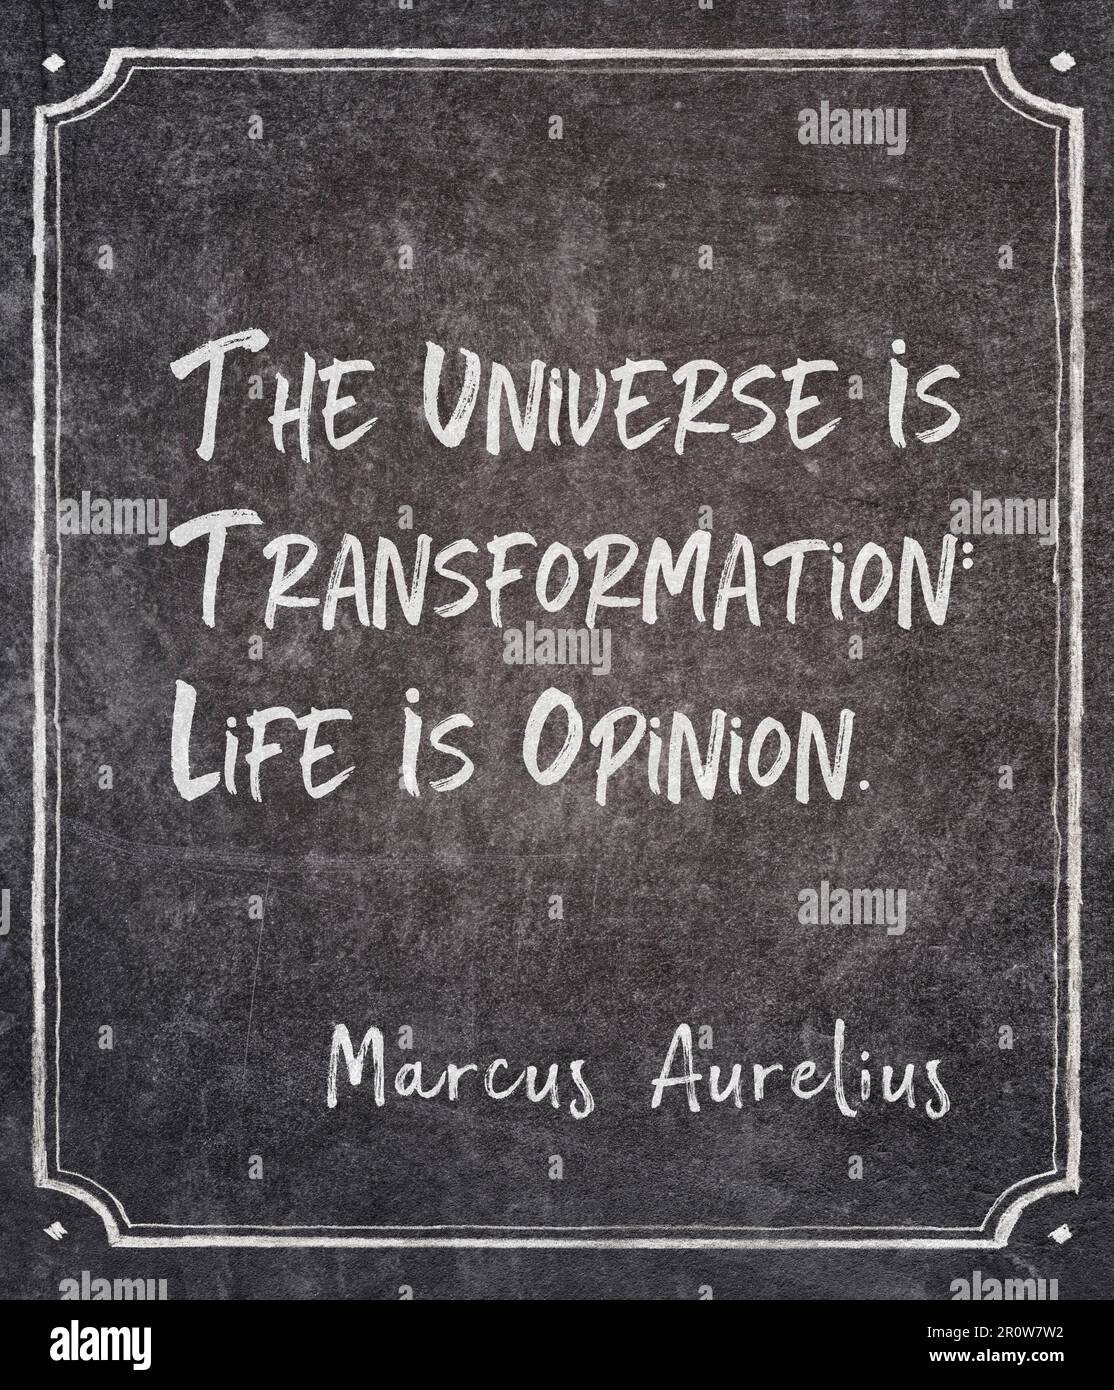 The universe is transformation: life is opinion - ancient Roman emperor and Stoic philosopher Marcus Aurelius quote written on framed chalkboard Stock Photo